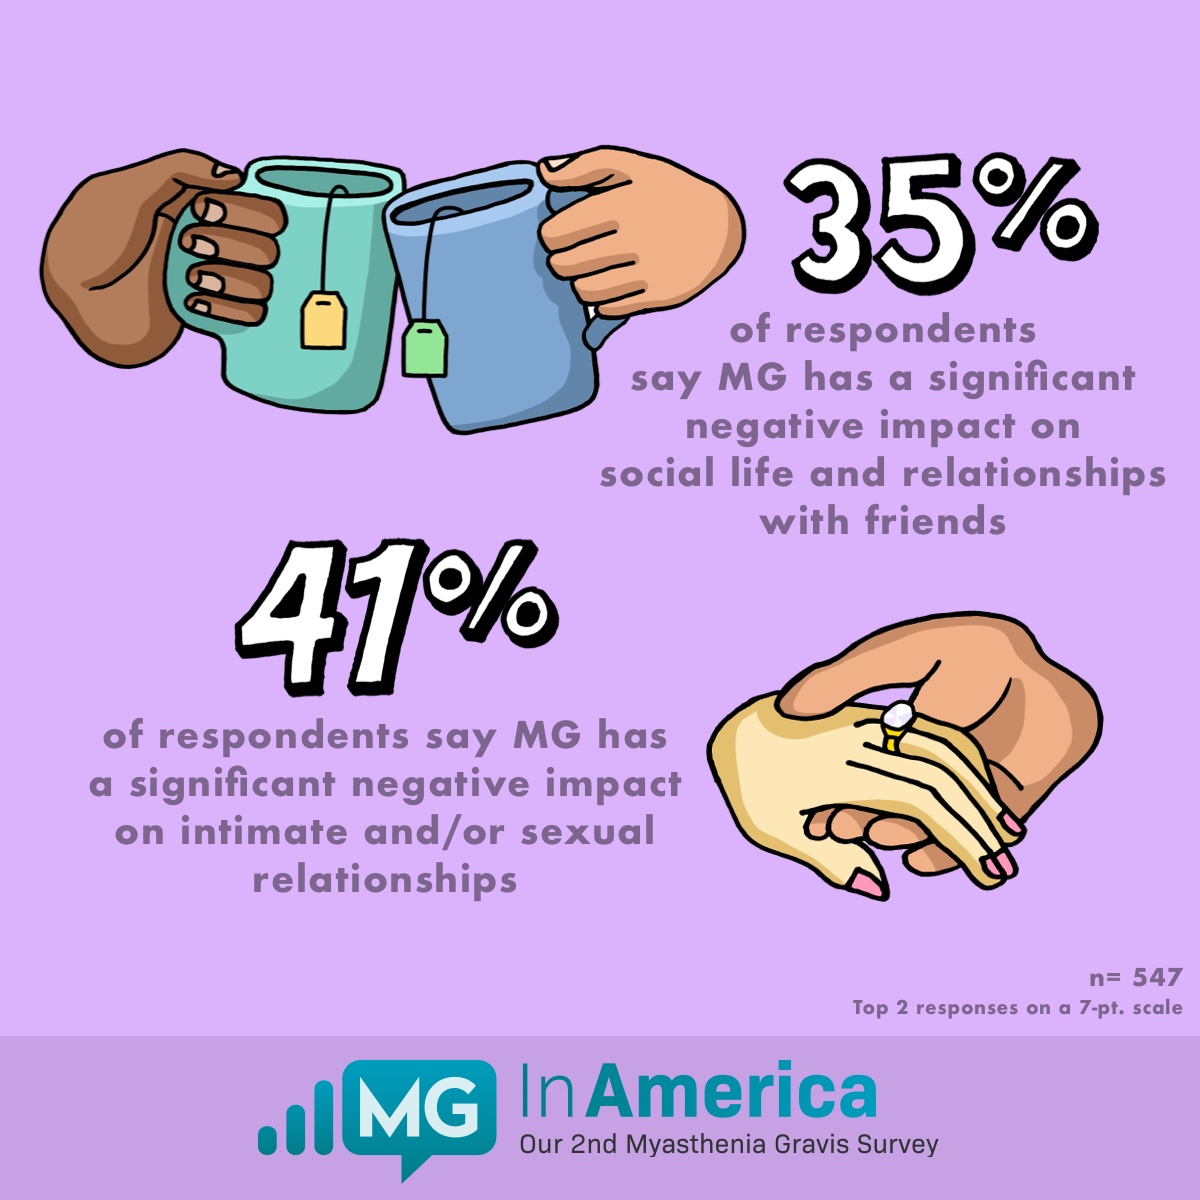 35% of respondents say MG has a significant negative impact on social life and relationships with friends. 41% say it has a significant negative impact on sexual and/or intimate relationships.